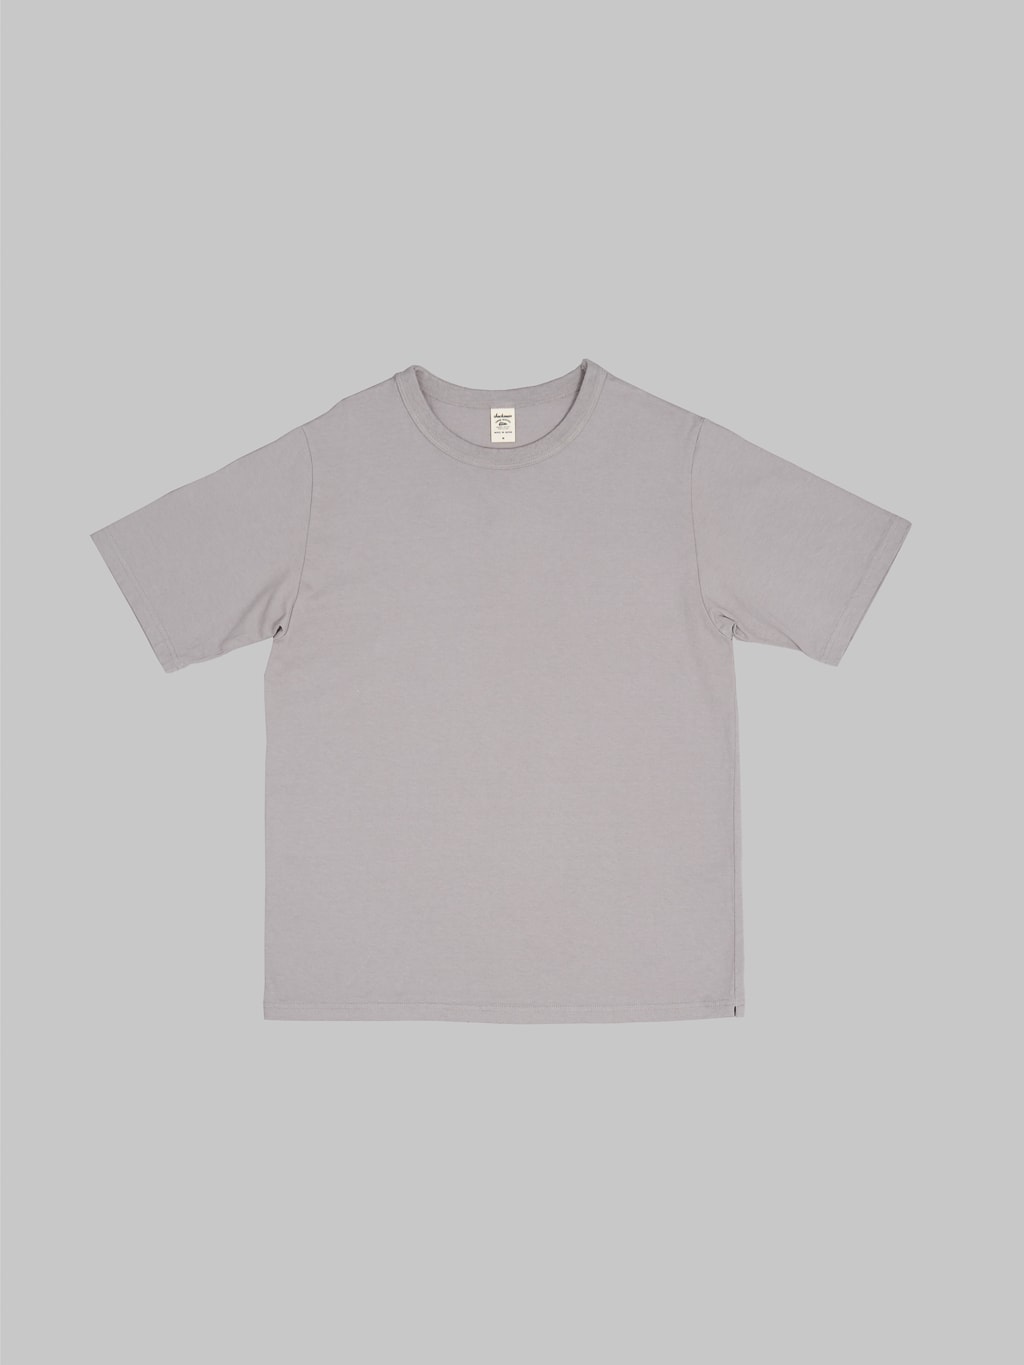 Jackman Lead Off TShirt grey midweight front